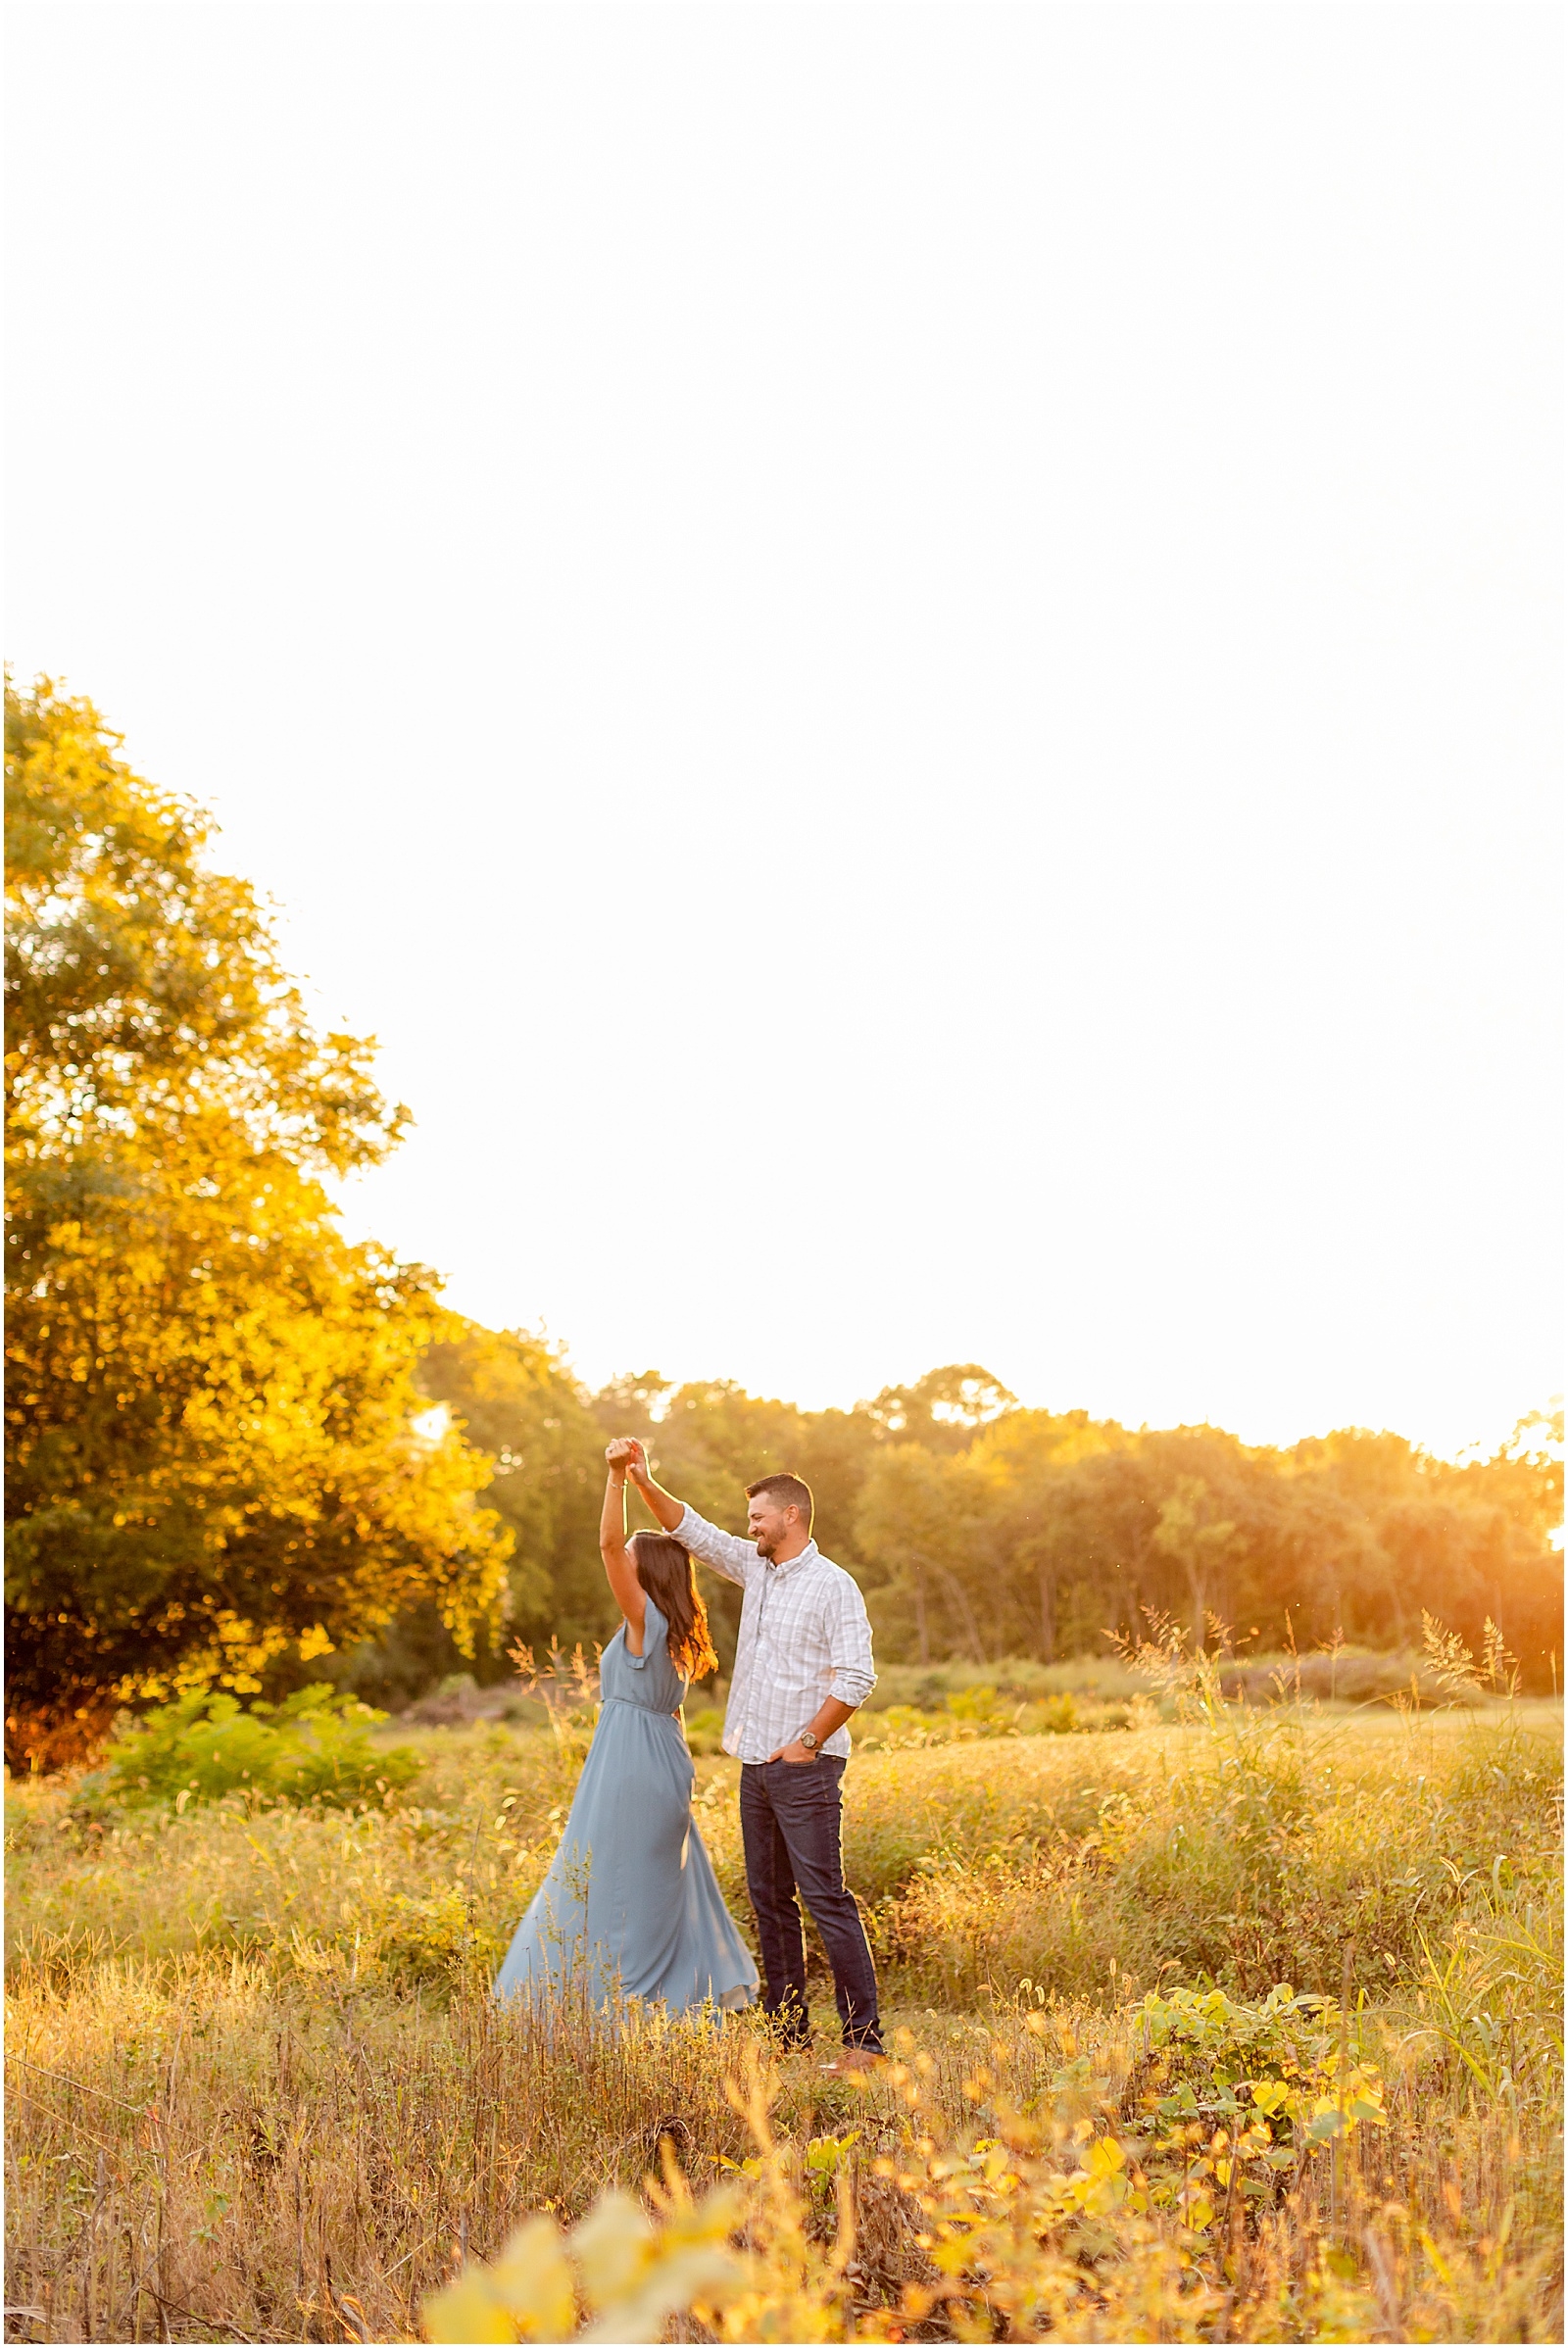 Sally and Andrew's Anniversary Session in New Harmony |Bret and Brandie Photography0020.jpg